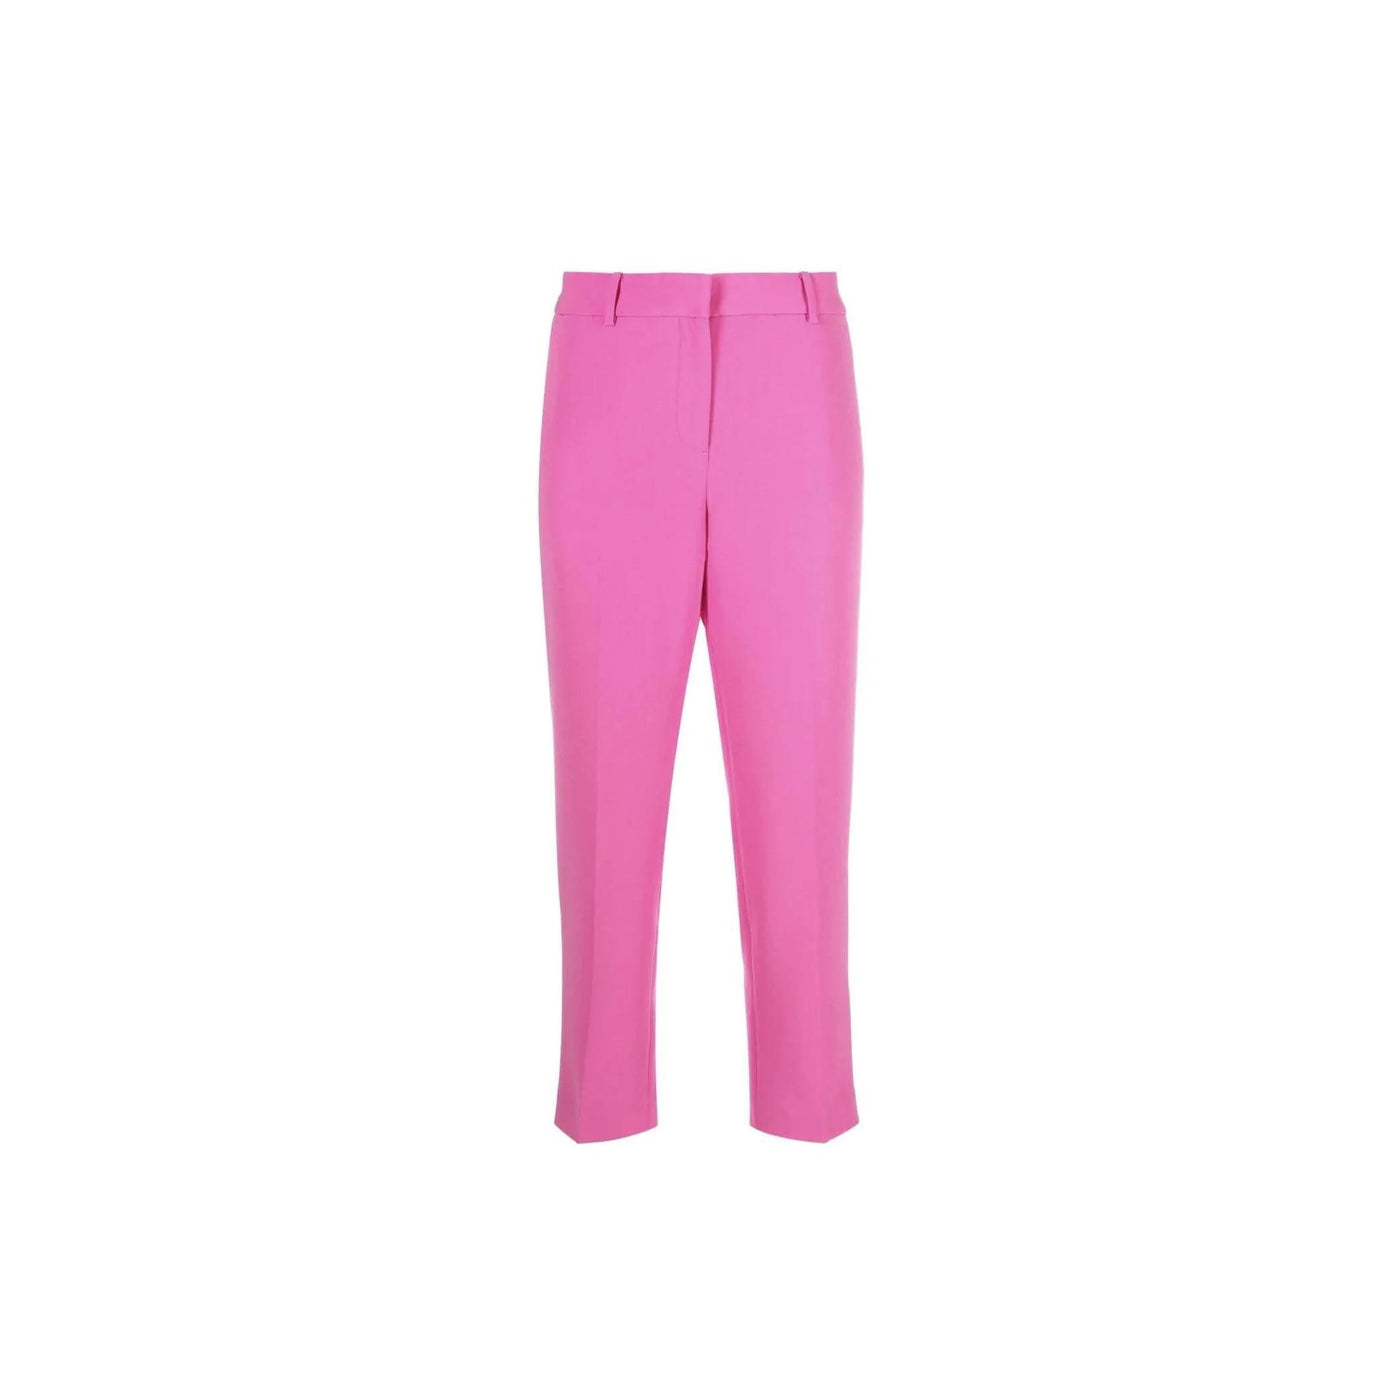 Straight line women's trousers